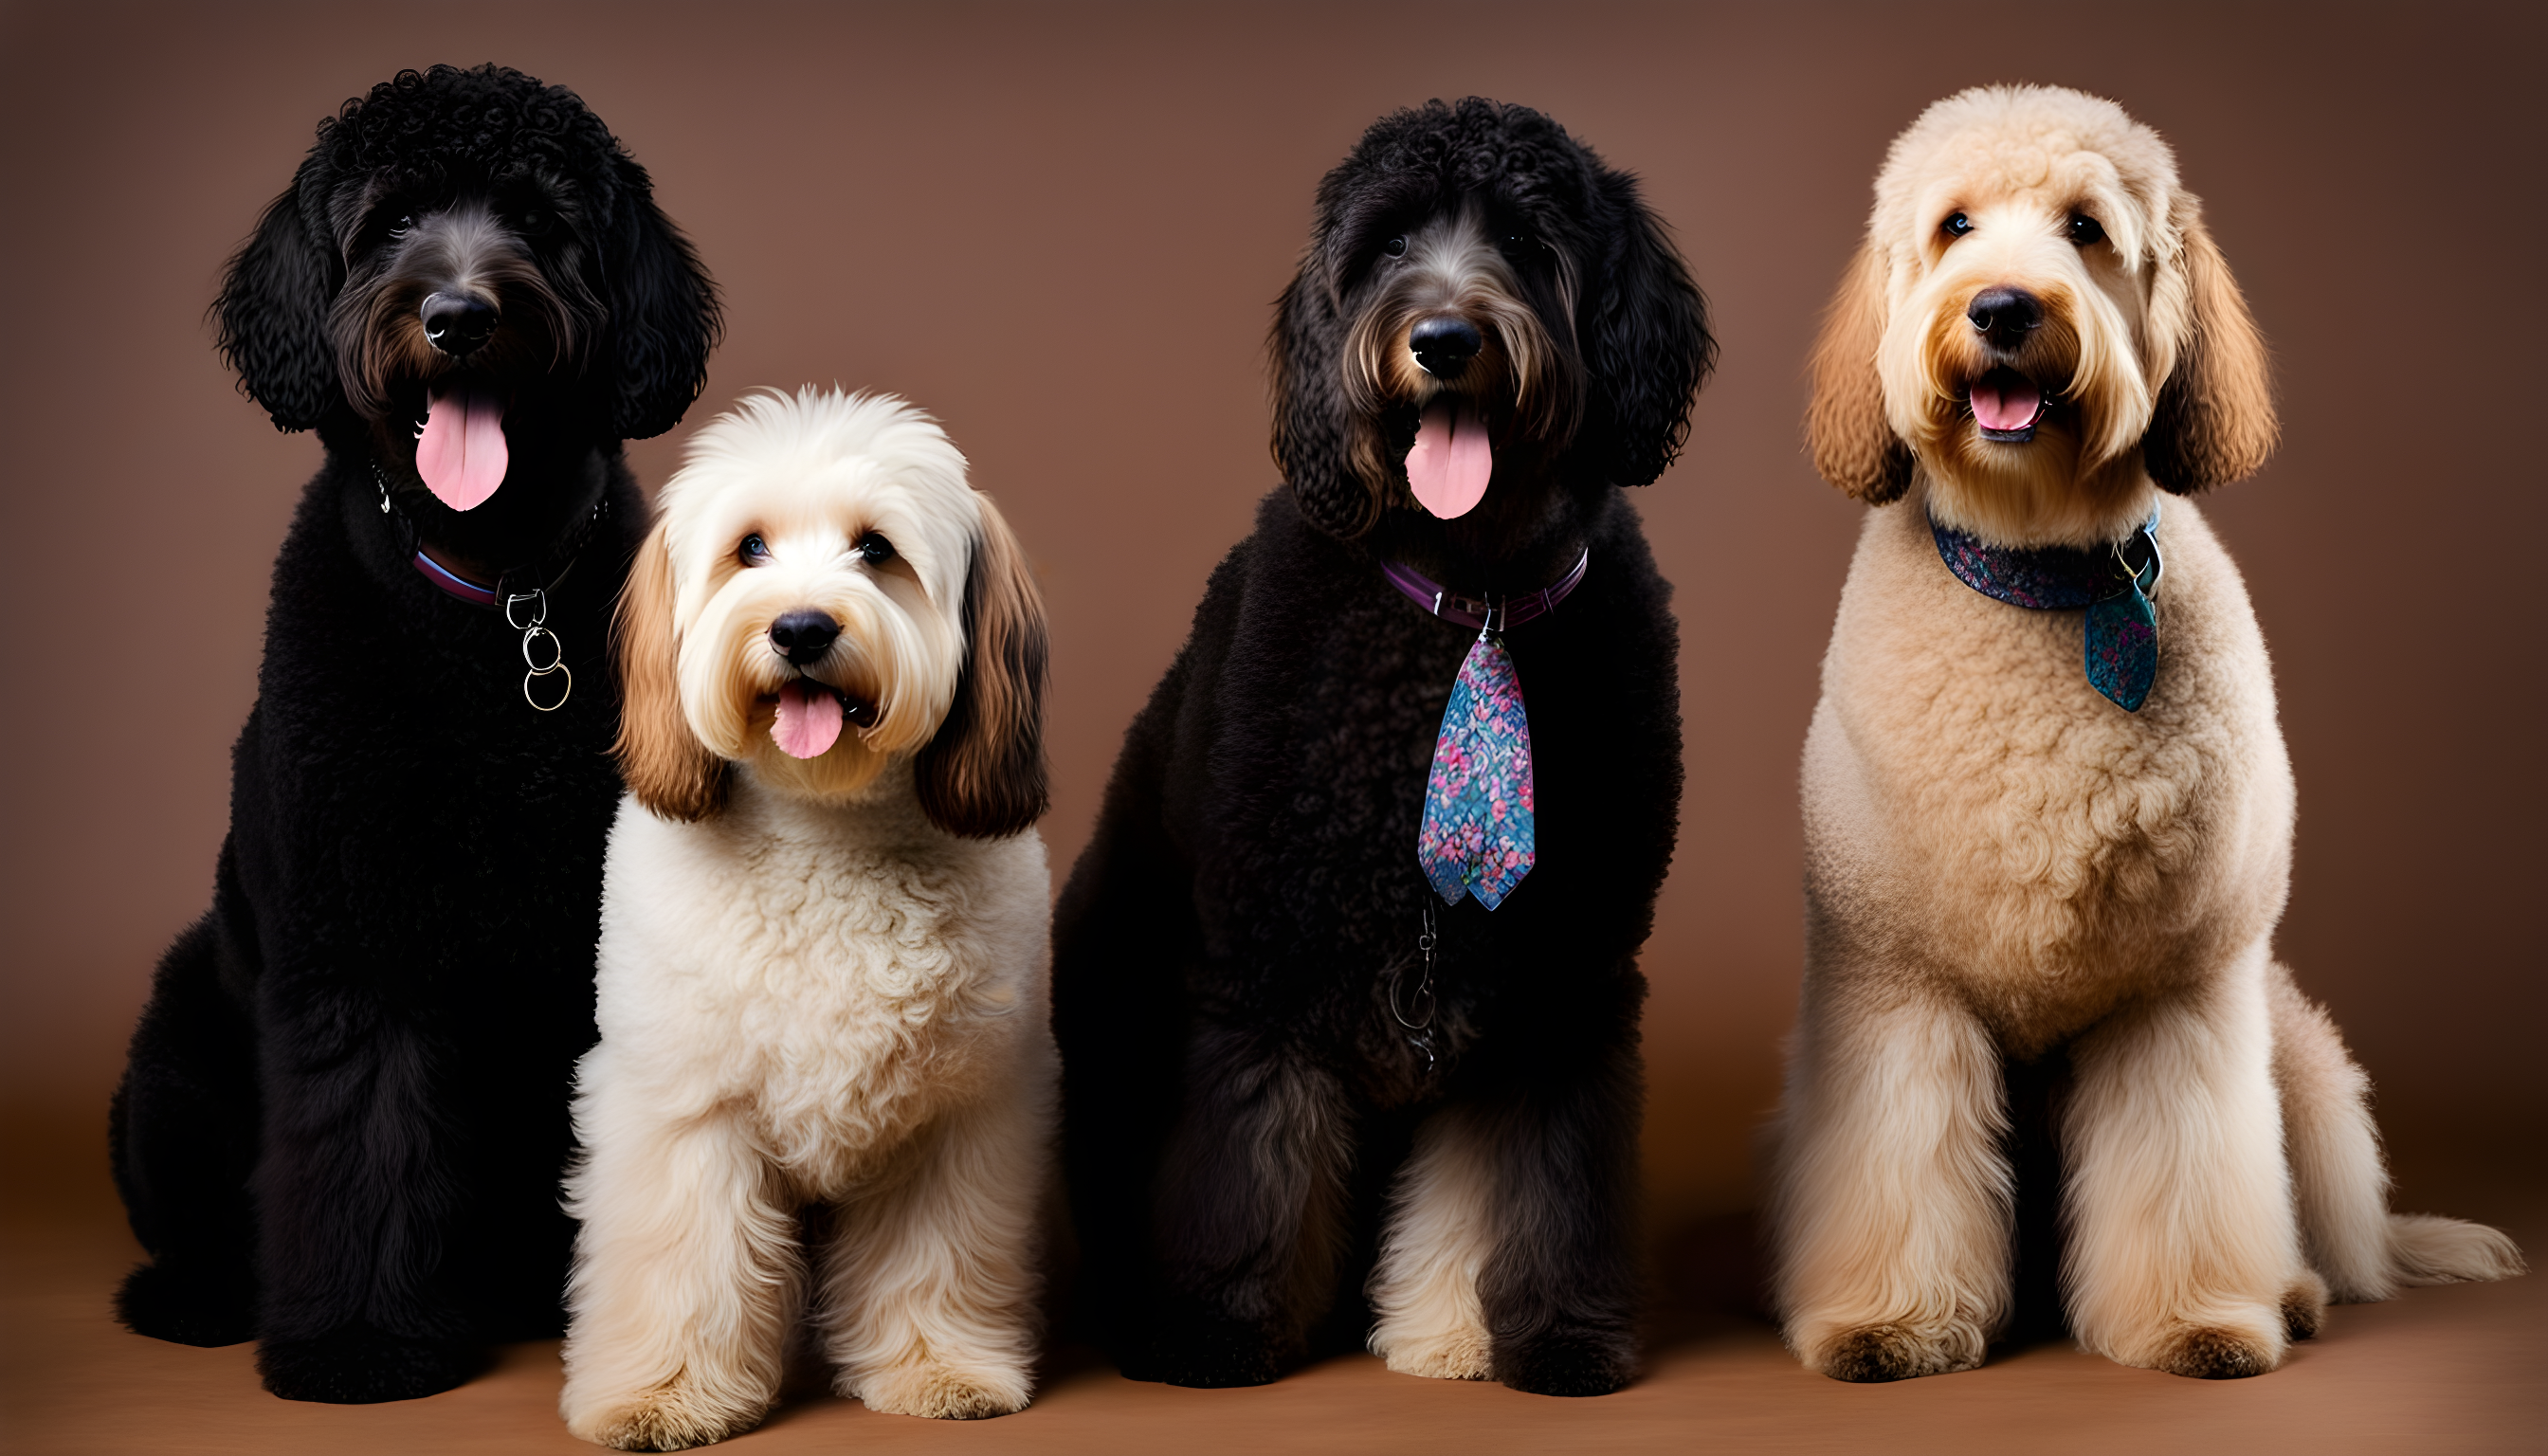 Three different Labradoodles standing side by side, each showing off a different type of coat: wool, fleece, and hair